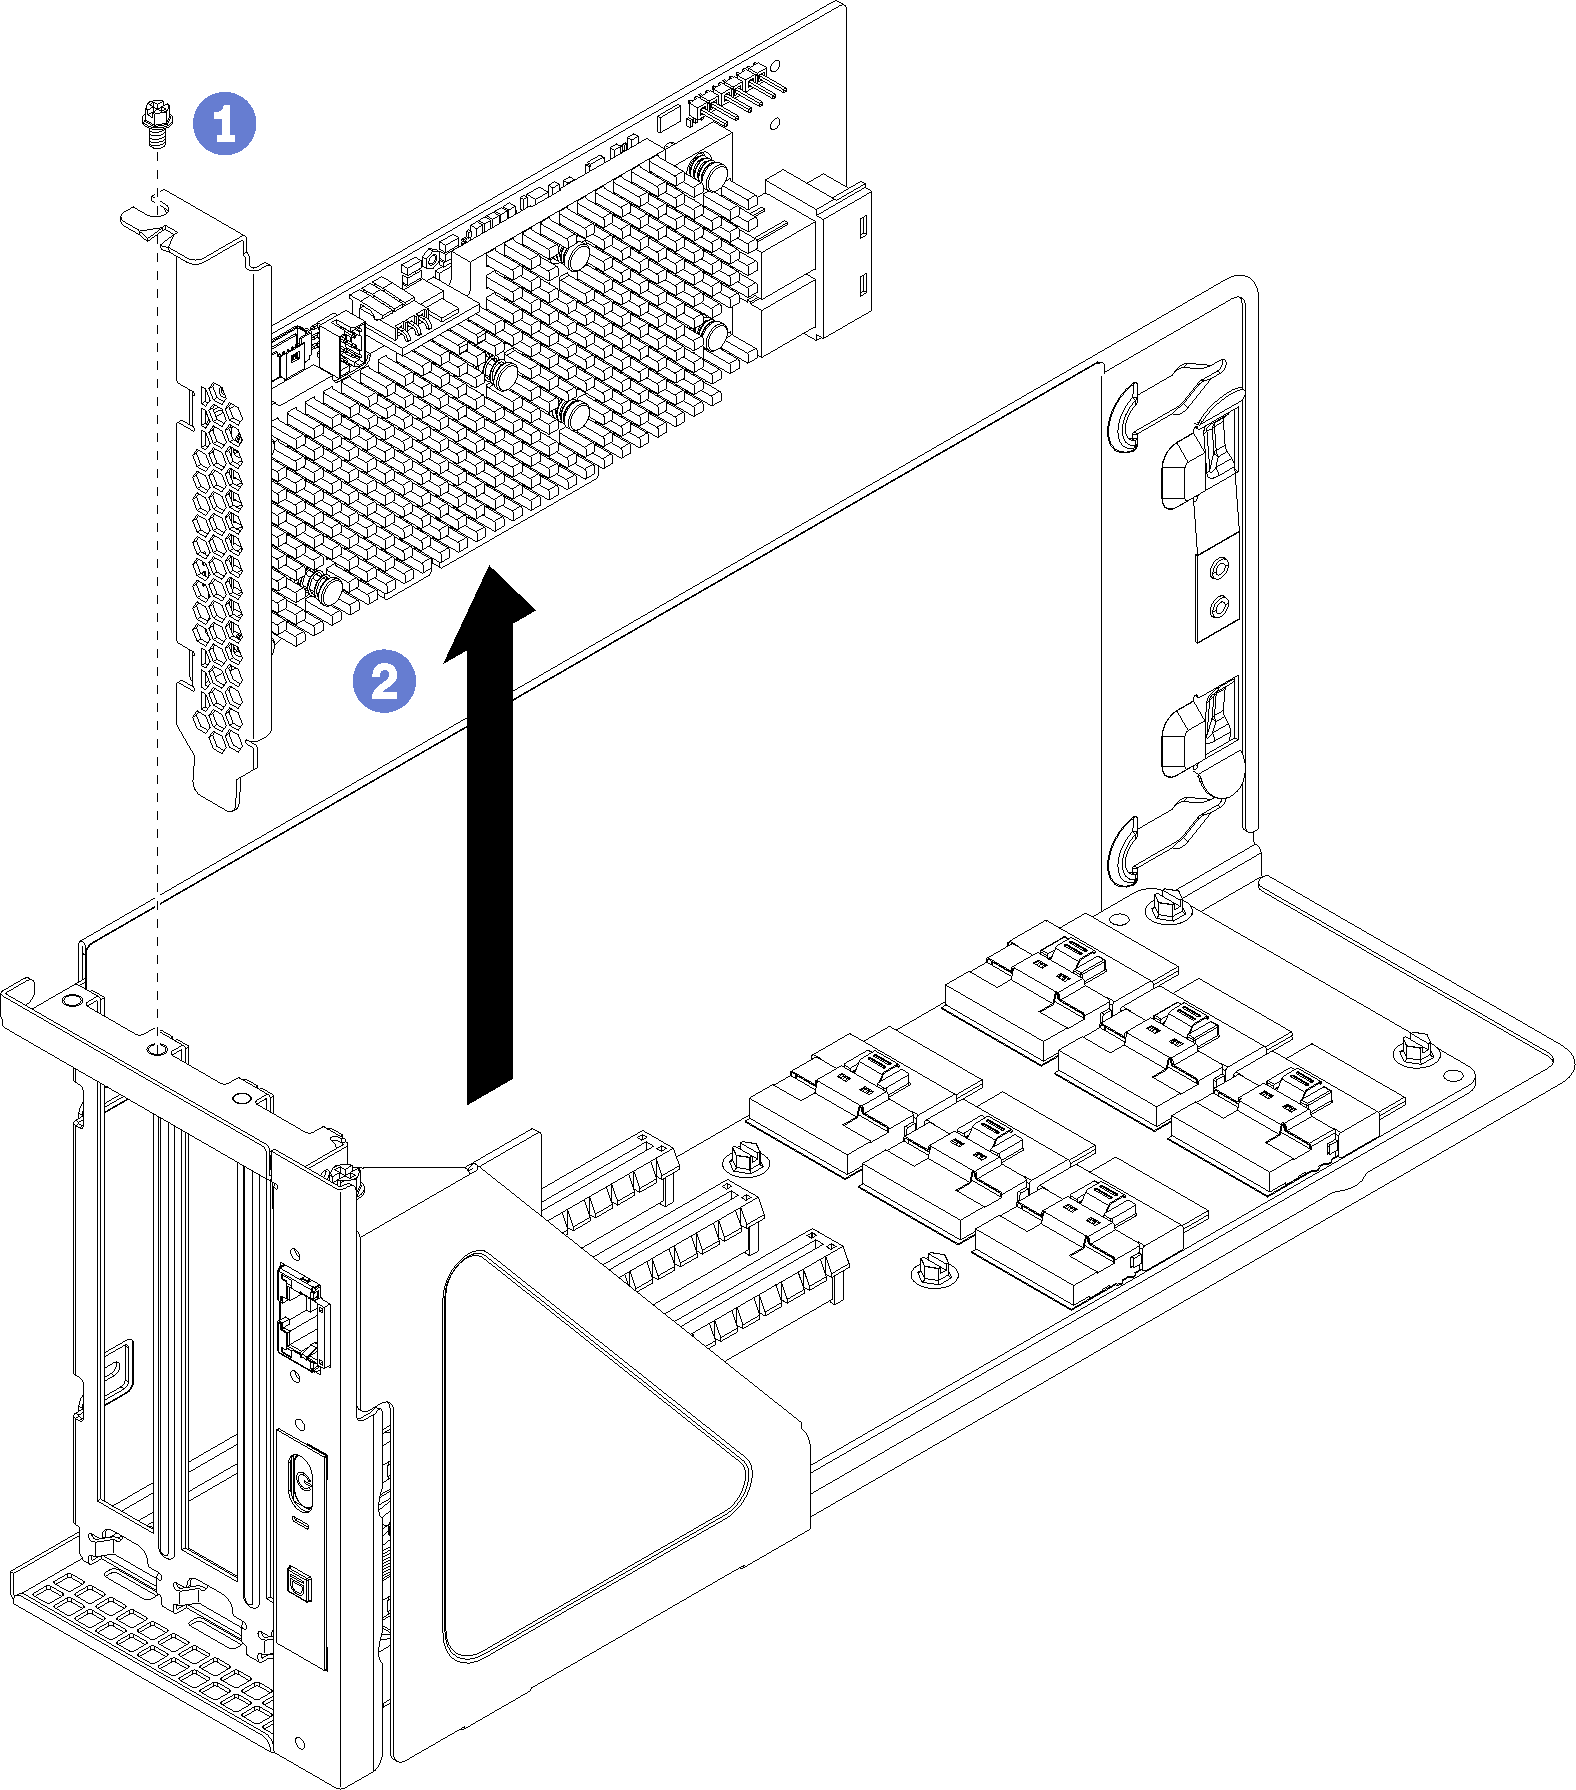 Removing a PCIe adapter from the I/O expansion cage